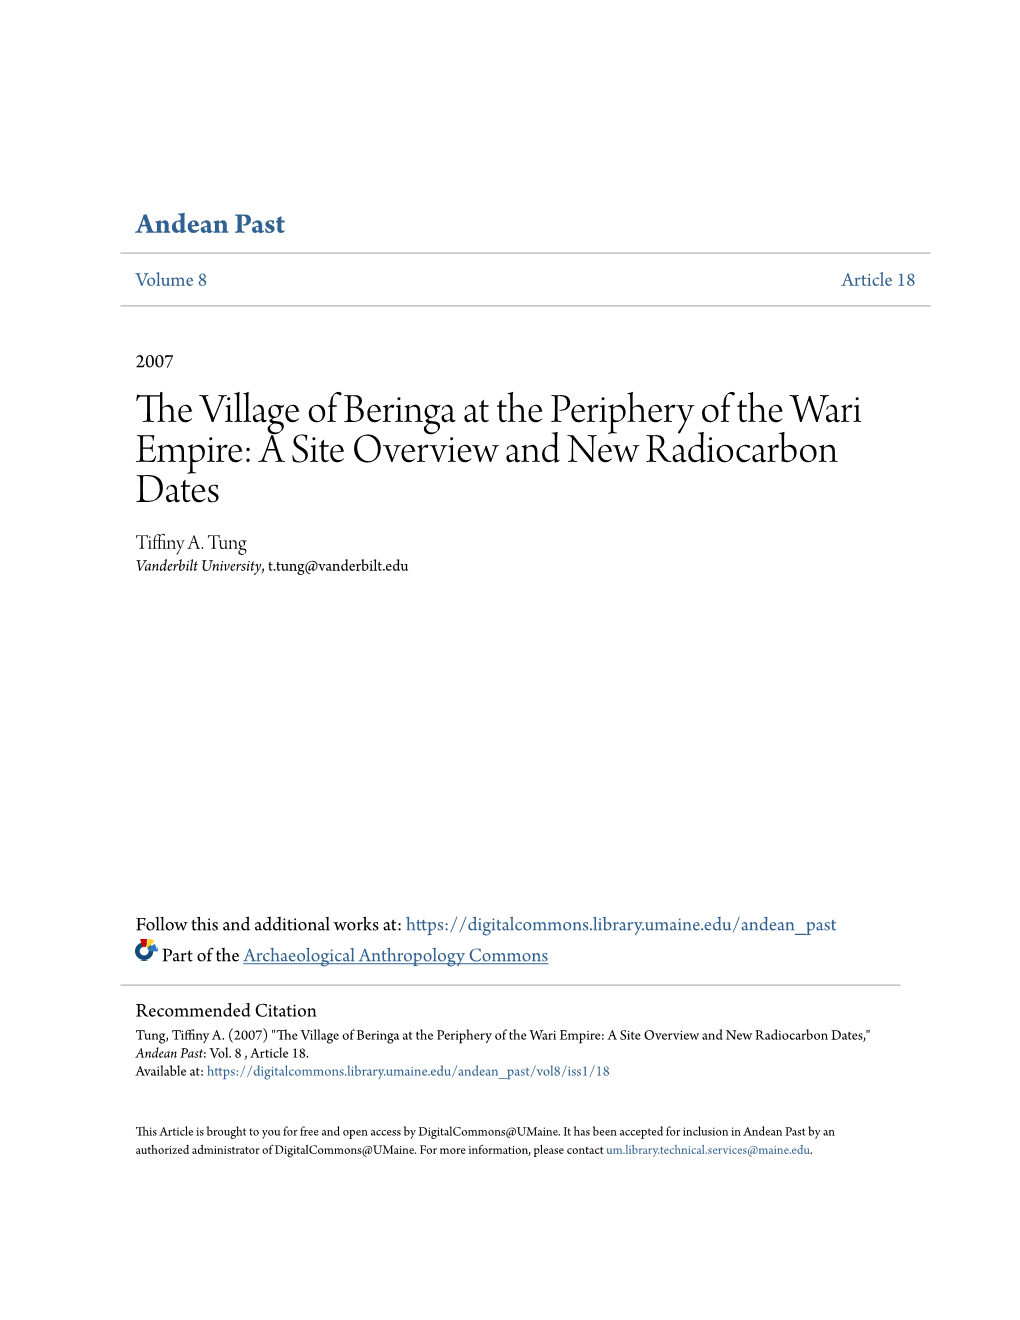 The Village of Beringa at the Periphery of the Wari Empire: a Site Overview and New Radiocarbon Dates